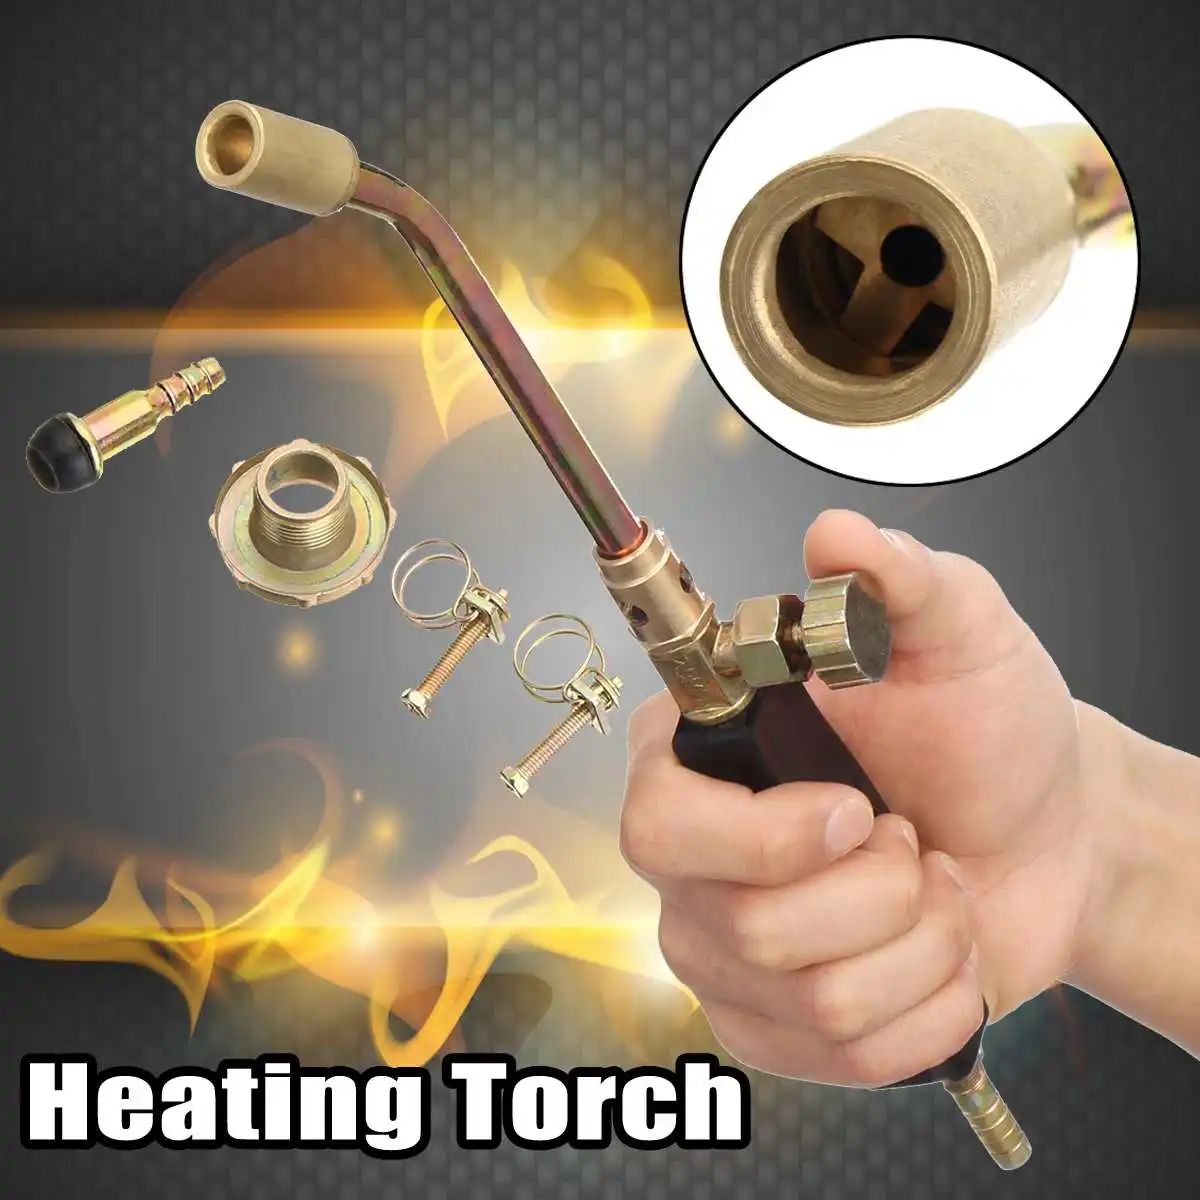 Details about   15-65 Heating Torch Propane Butane Gas Flame Blow Plunber Roofing Soldering Gun 